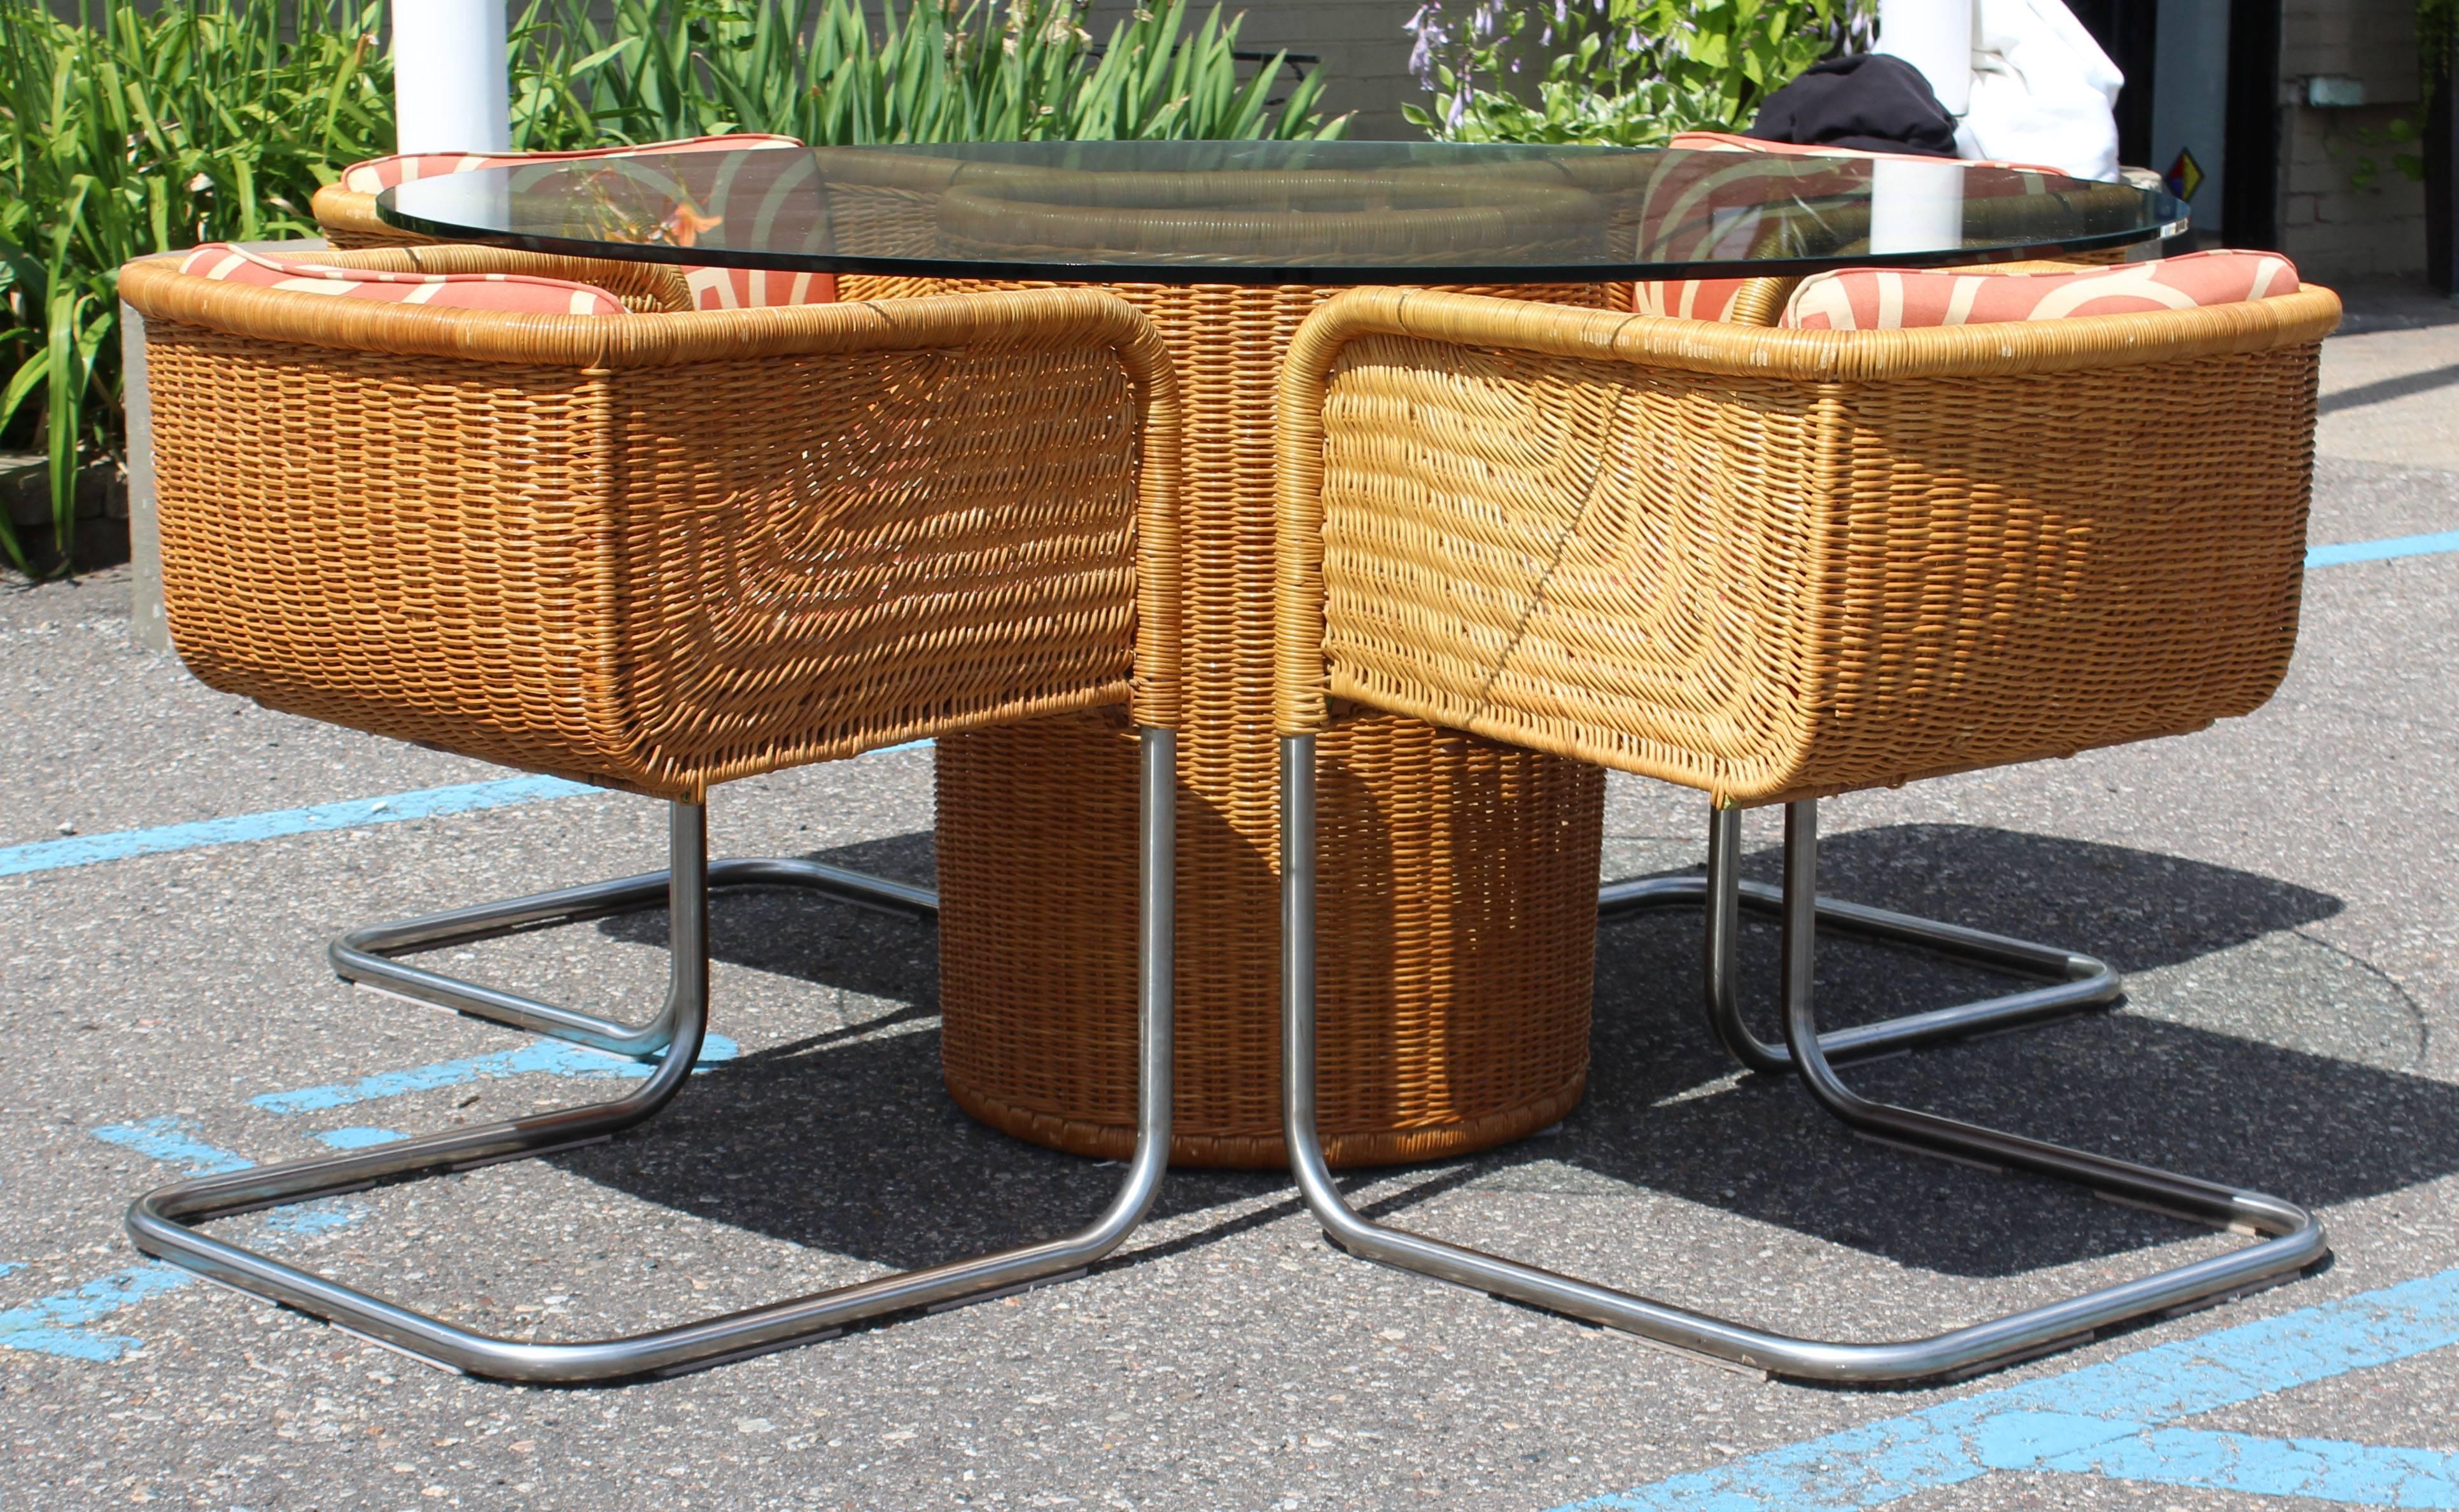 For your consideration is a marvelous, rattan and tubular chrome, patio set by Harvey Probber. This set includes a table with a round, glass top and four cantilever basket chairs. In excellent condition. The dimensions of the table are 54"